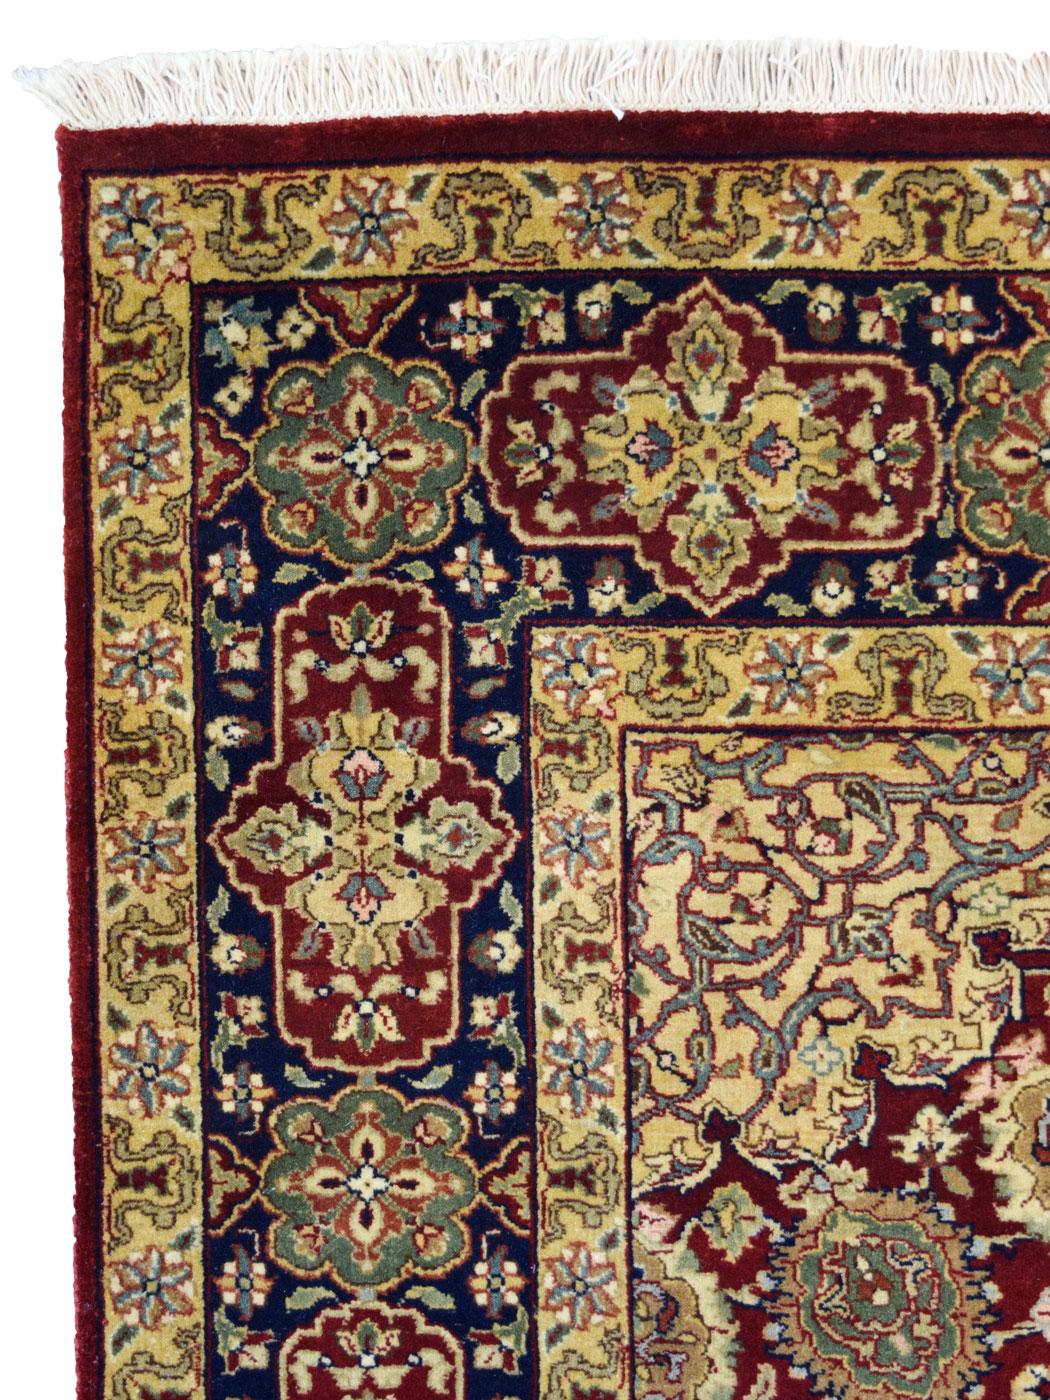 Fine Hand Knotted Tabriz Carpet in Gold Maroon and Cream Wool, 5' x 7' For Sale 3